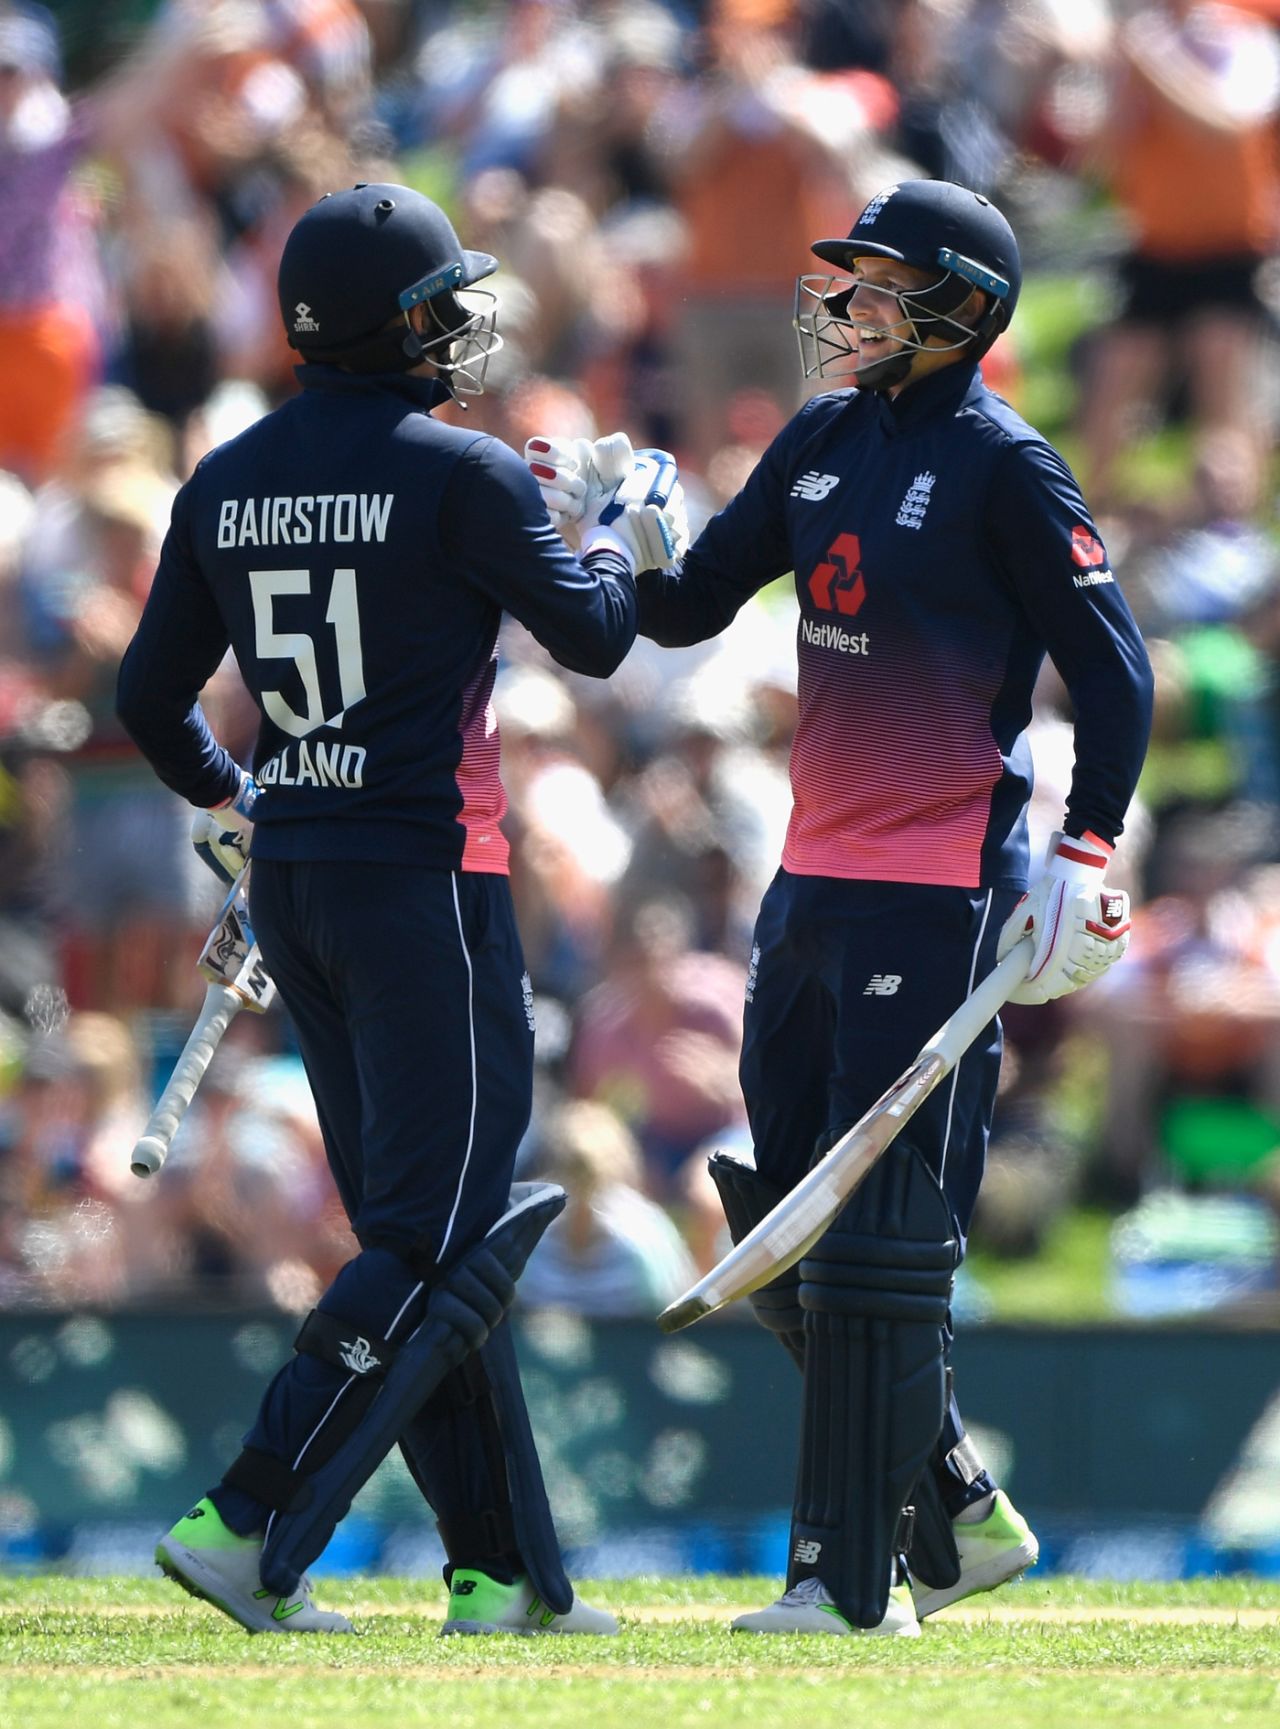 Jonny Bairstow and Joe Root added 190 for the second wicket, New Zealand v England, 4th ODI, Dunedin, March 7, 2018